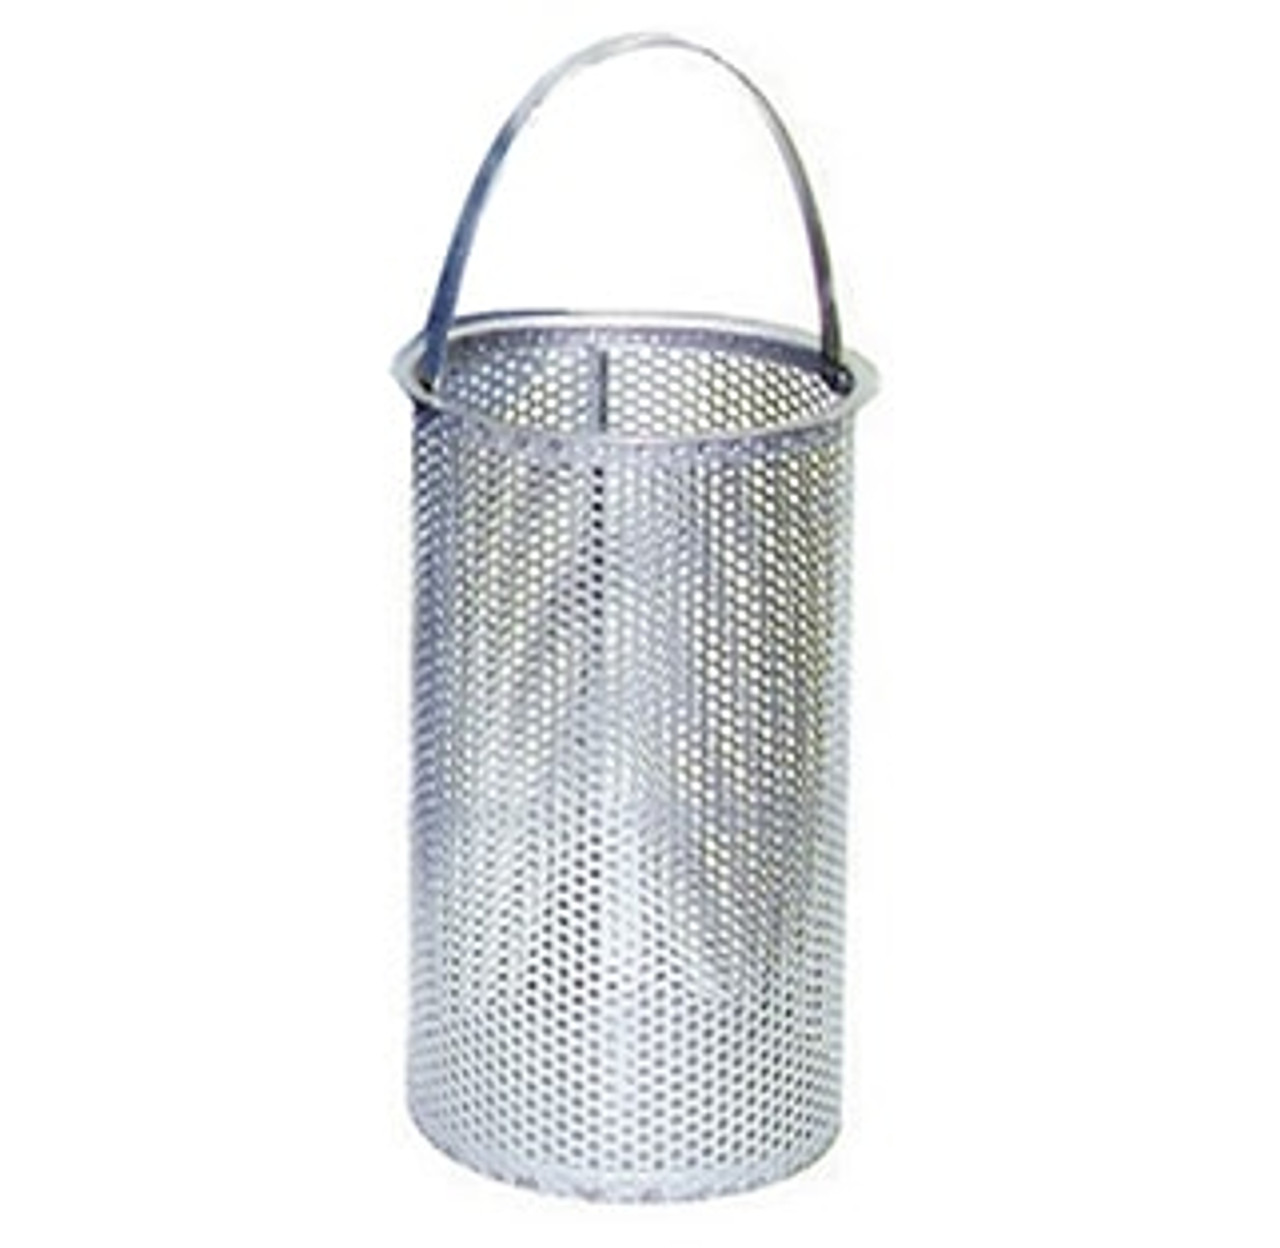 20 Mesh and 5/32" Perforation Replacement Basket for 8" Eaton Model 30R Strainer